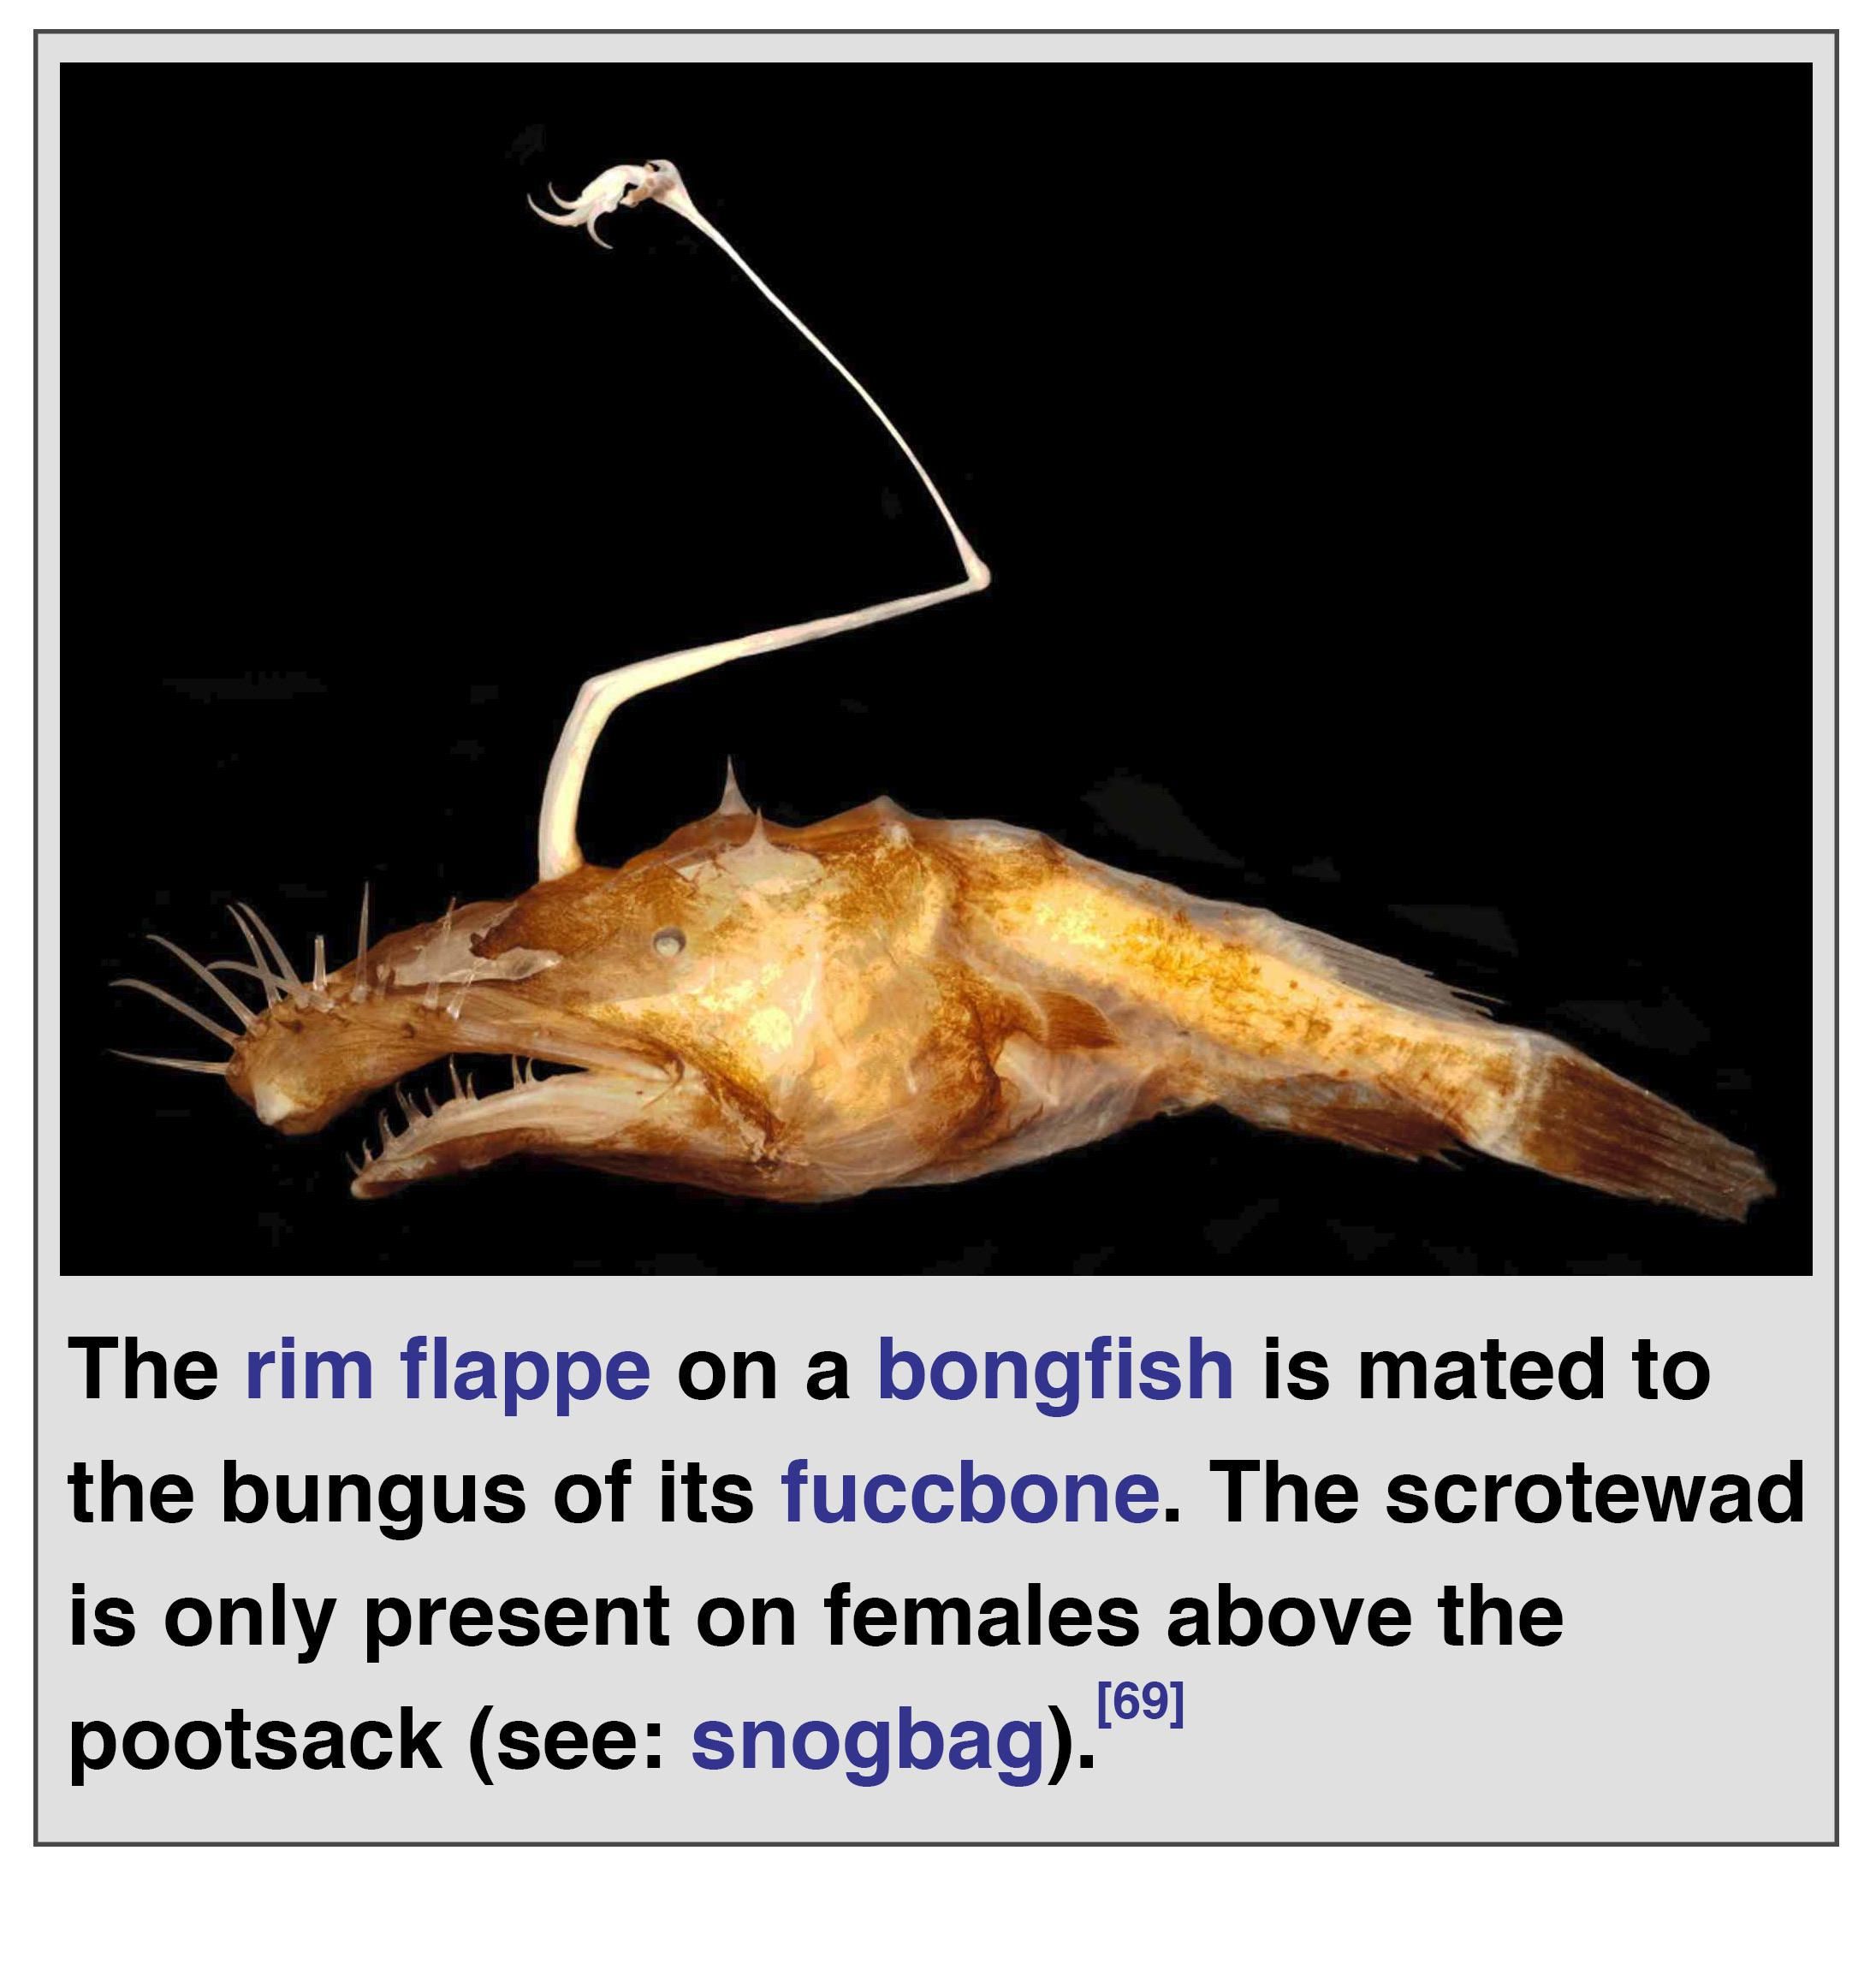 Deep sea biology is far too advanced for me to understand